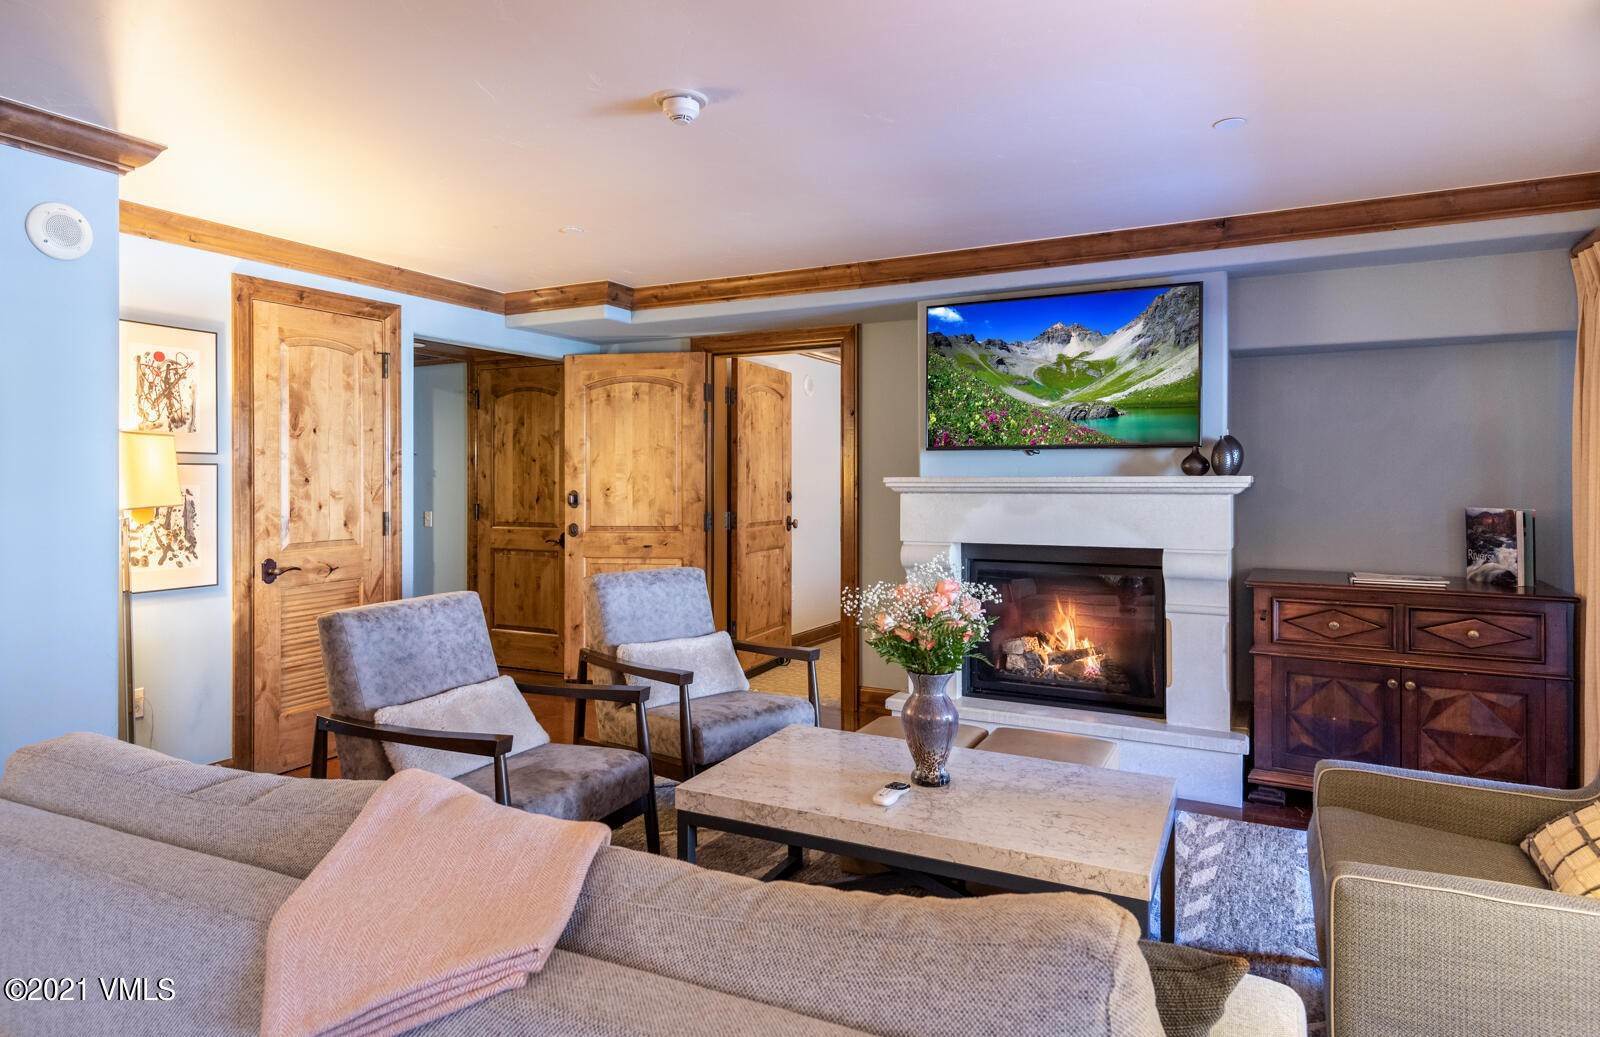 3. Fractional Ownership Property for Active at 16 Vail Road Vail, Colorado 81657 United States